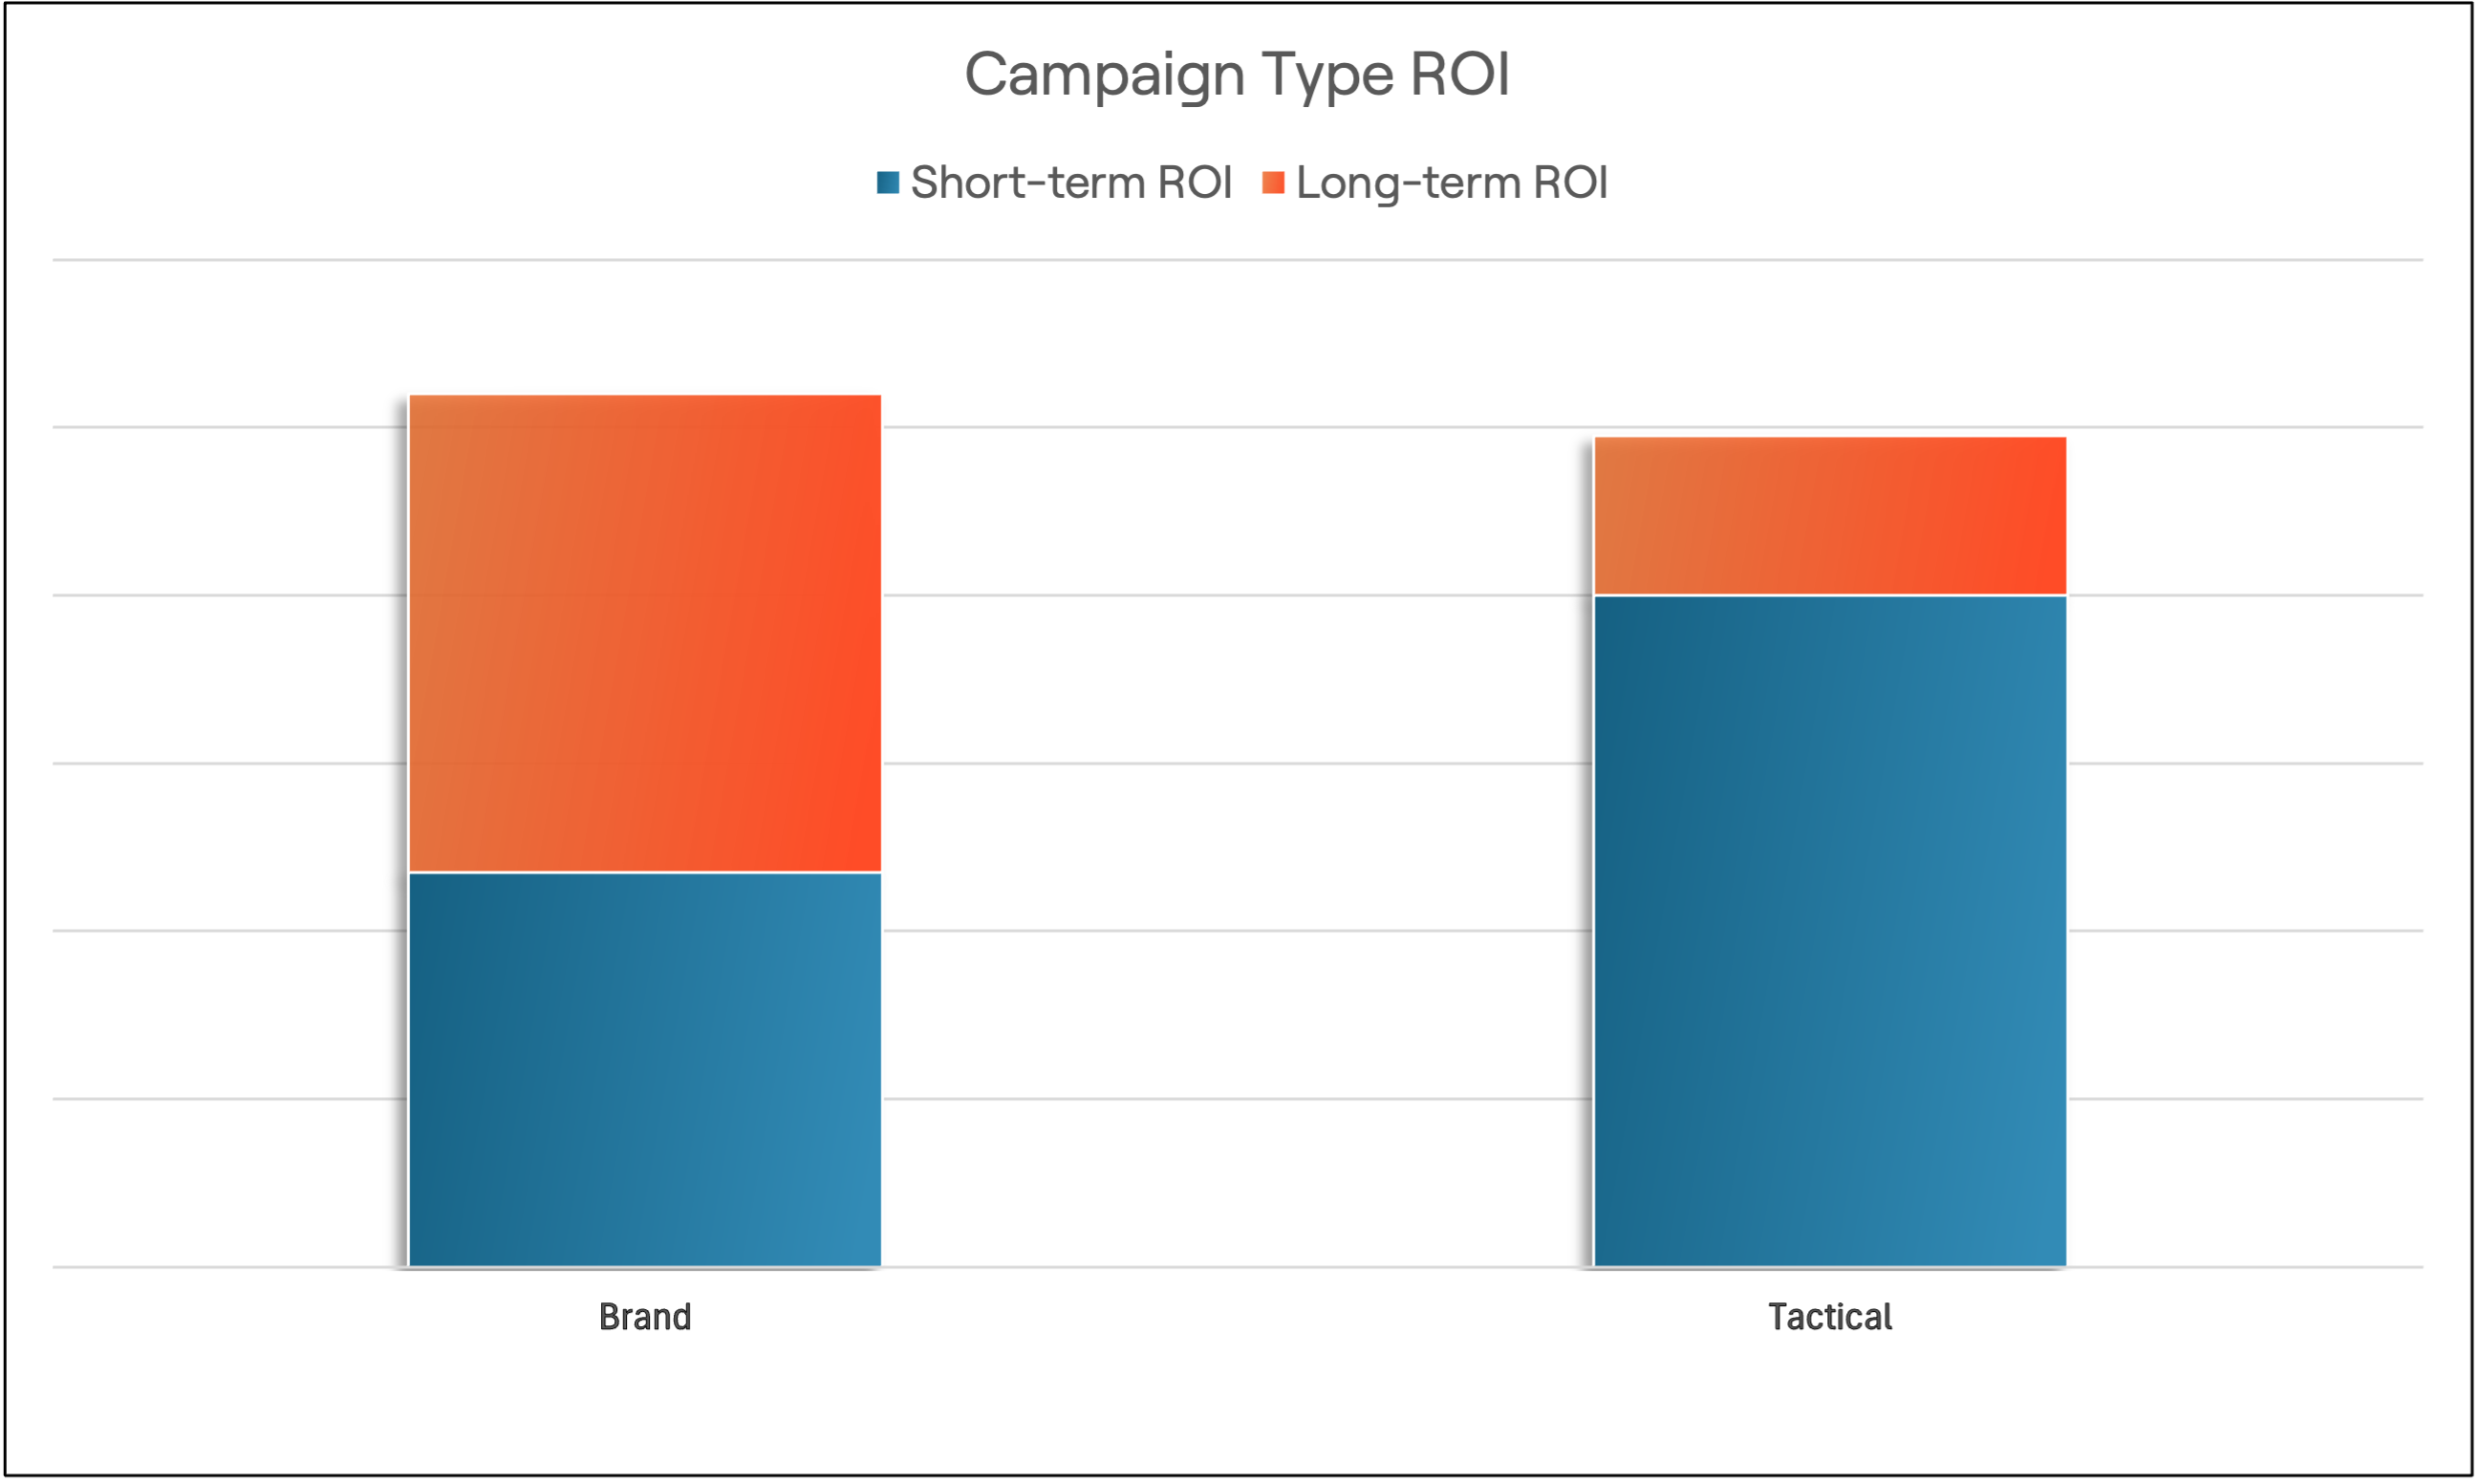 Short- and Long-Term comparison of the Campaign Type ROI